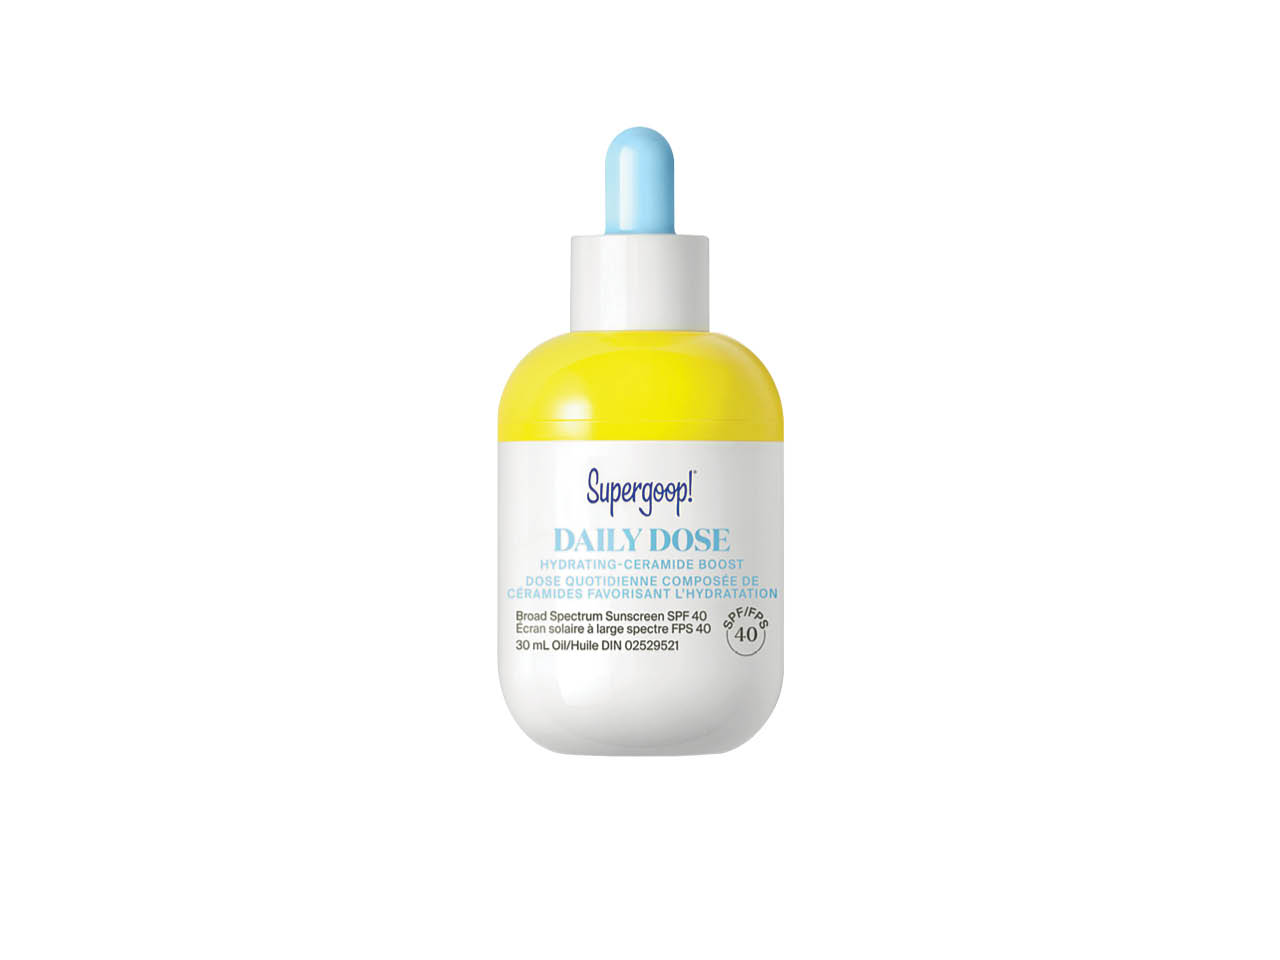 A white, yellow and blue bottle with a dropper of Supergoop! Daily Dose Hydrating-Ceramide Boost SPF 40 sunscreen.